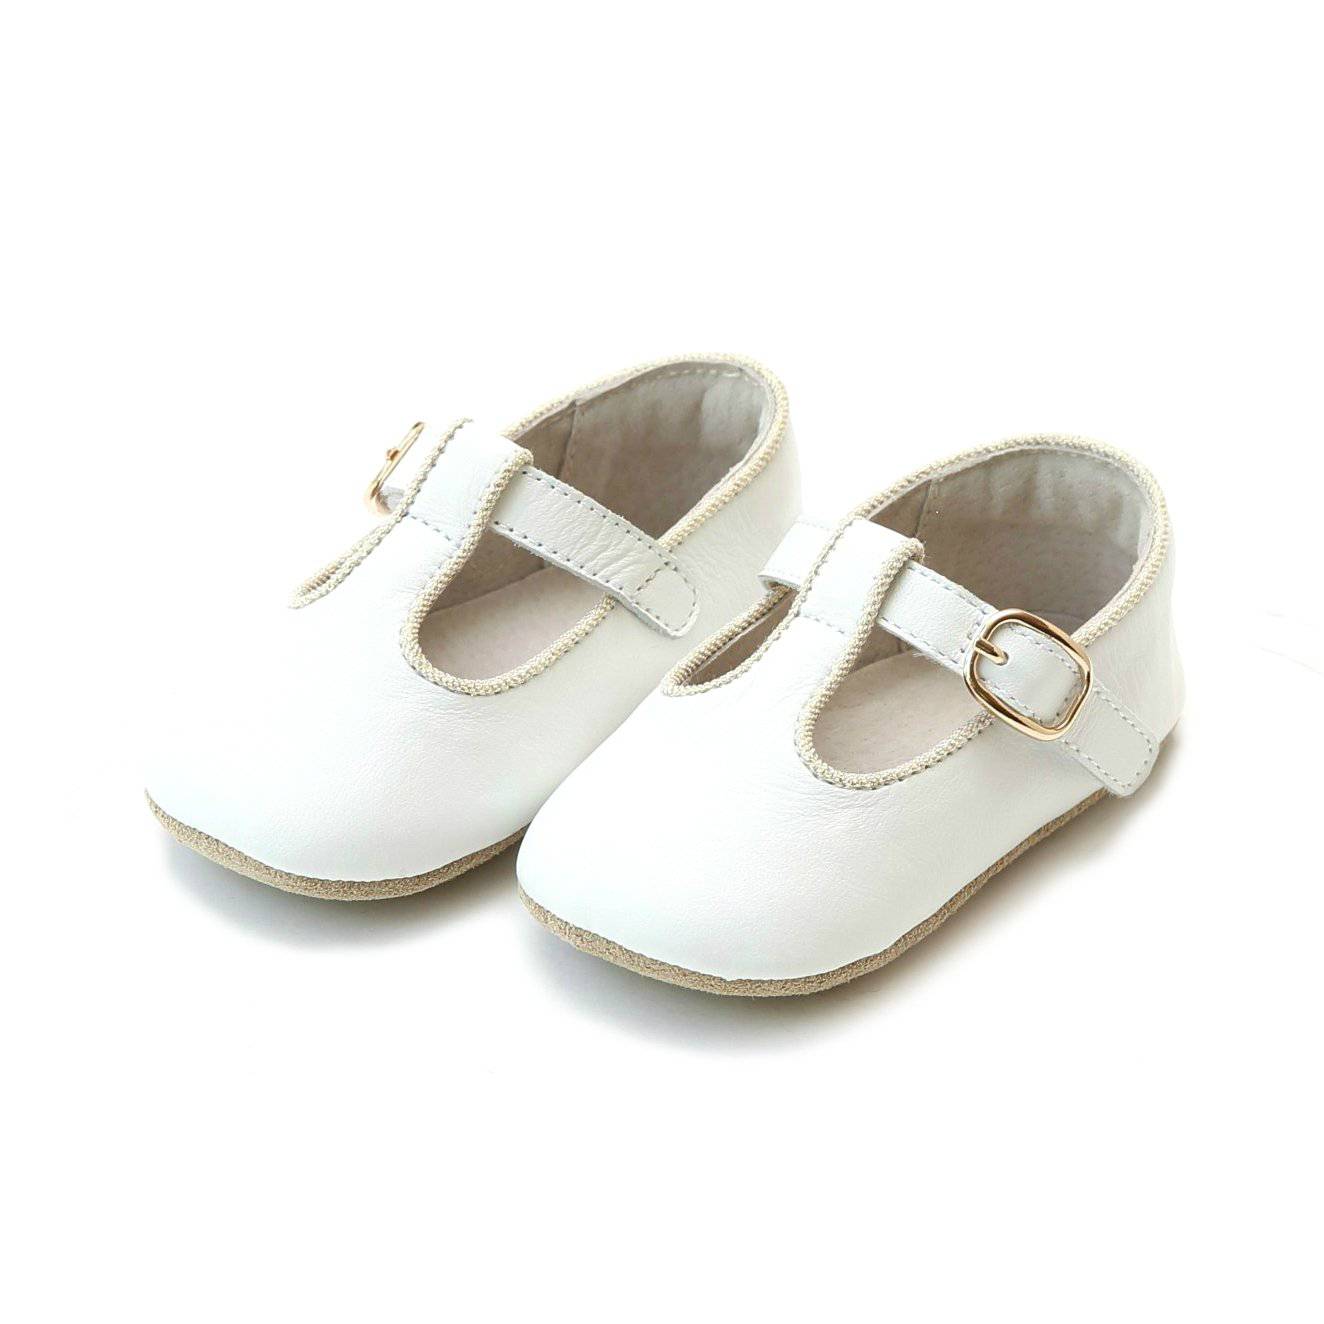 L'amour - L'Amour Baby Girl Evie Mary Jane Crib Shoe - Little Miss Muffin Children & Home